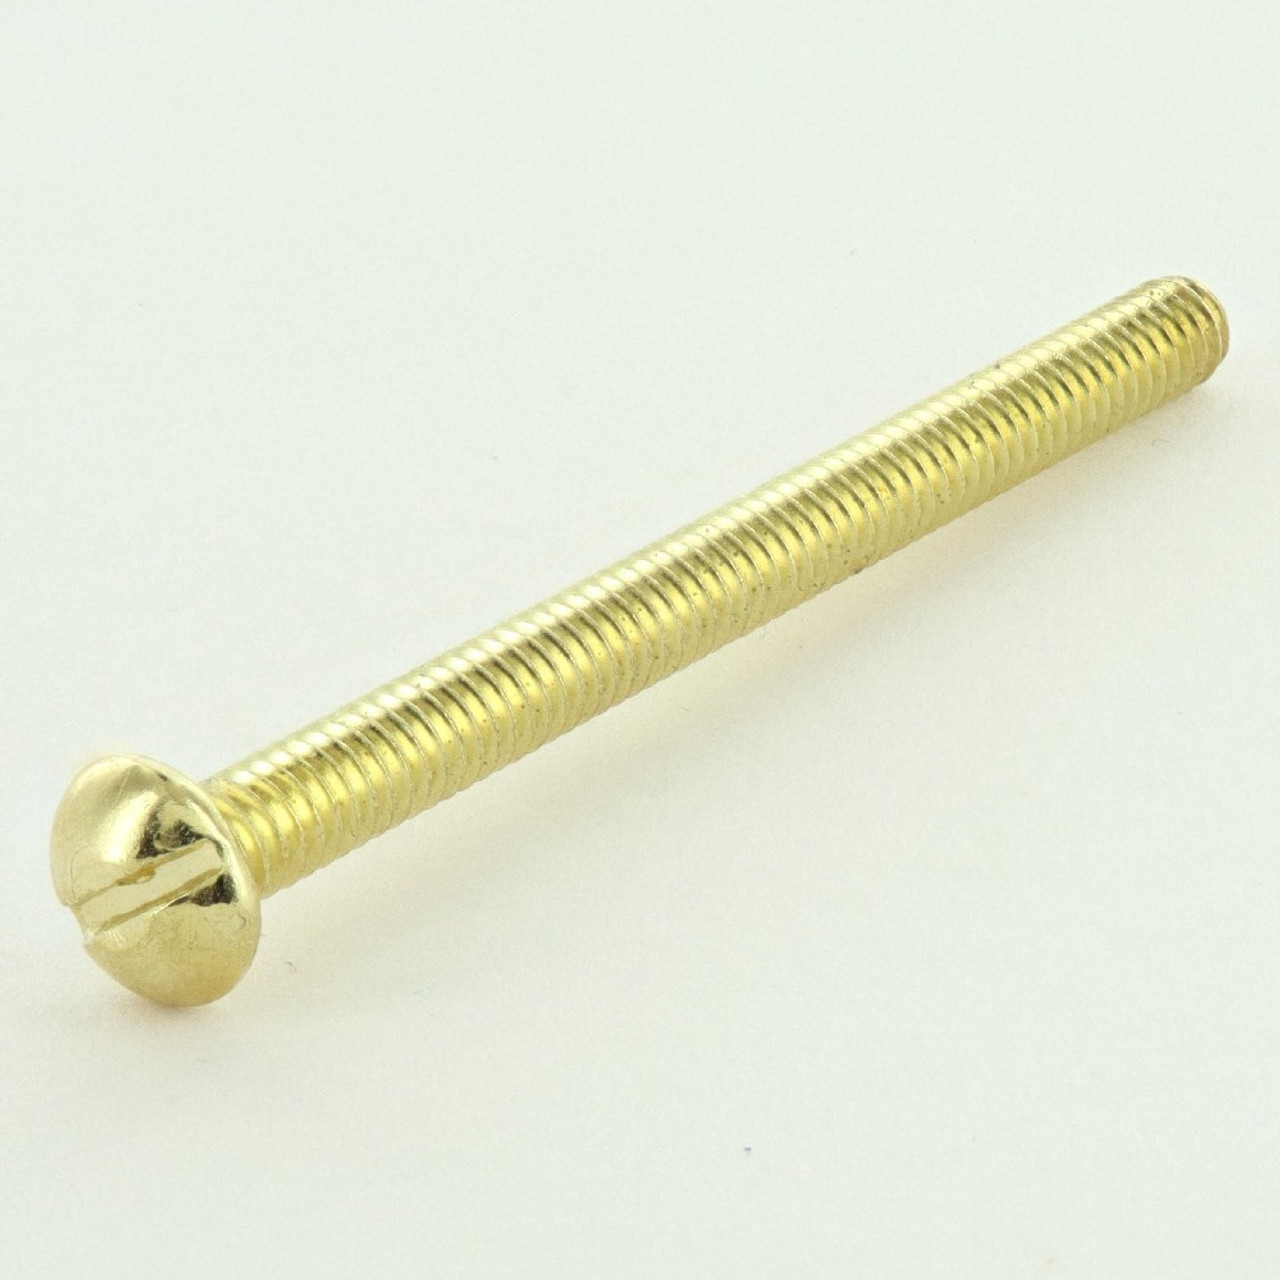 8/32 Thread - 2in. Long - Slotted Round Head Steel Screw - Polished Nickel  Finish